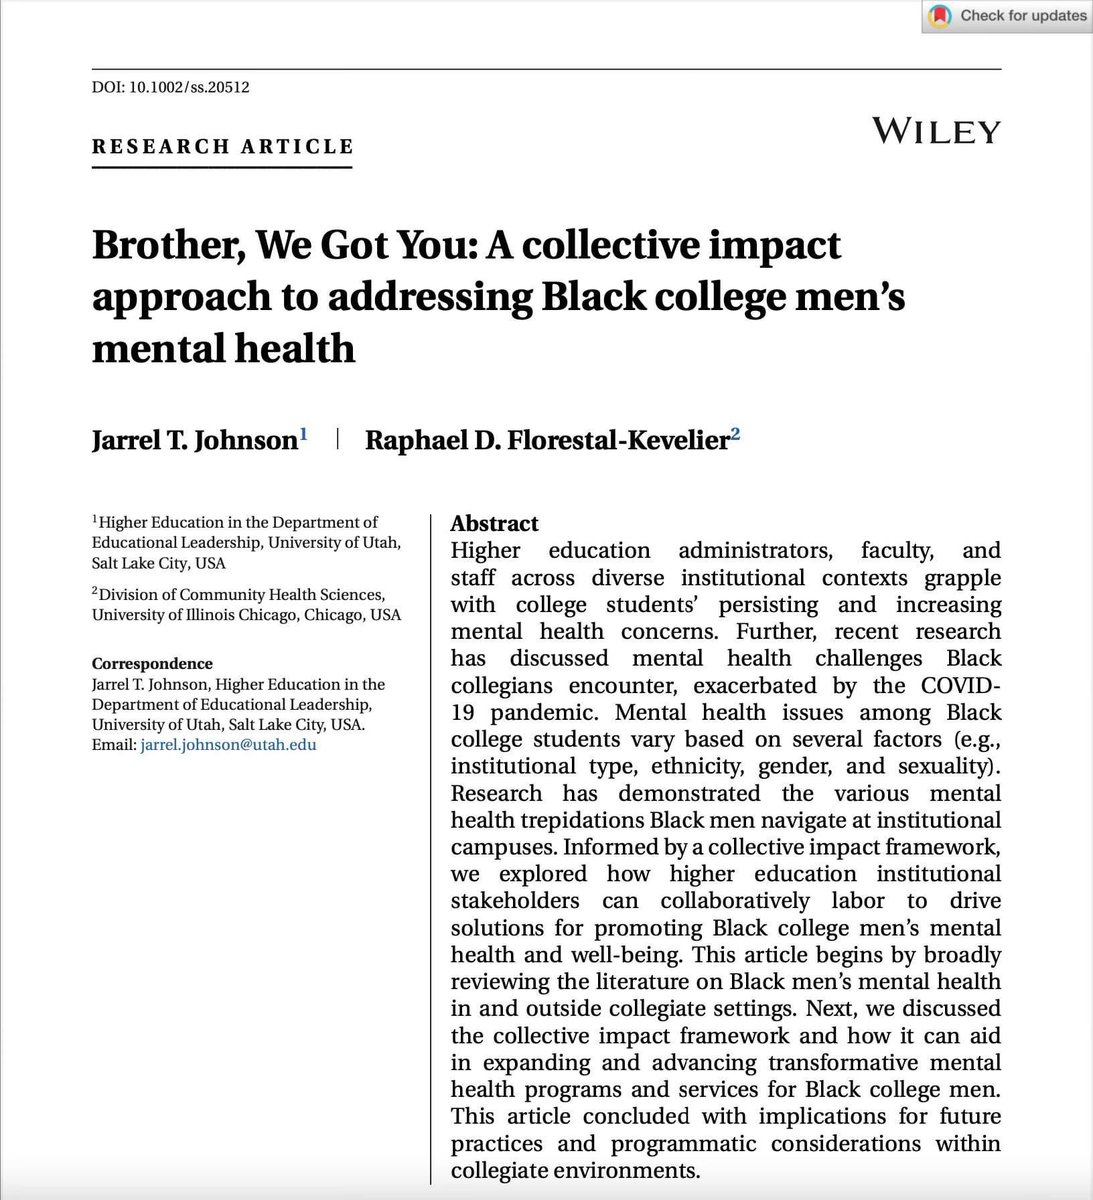 🚨New Pub w/ @DrRaphC is available now (free open access)! This pub explored collective & innovative strategies to support Black college men’s mental health! Read more here: doi.org/10.1002/ss.205…